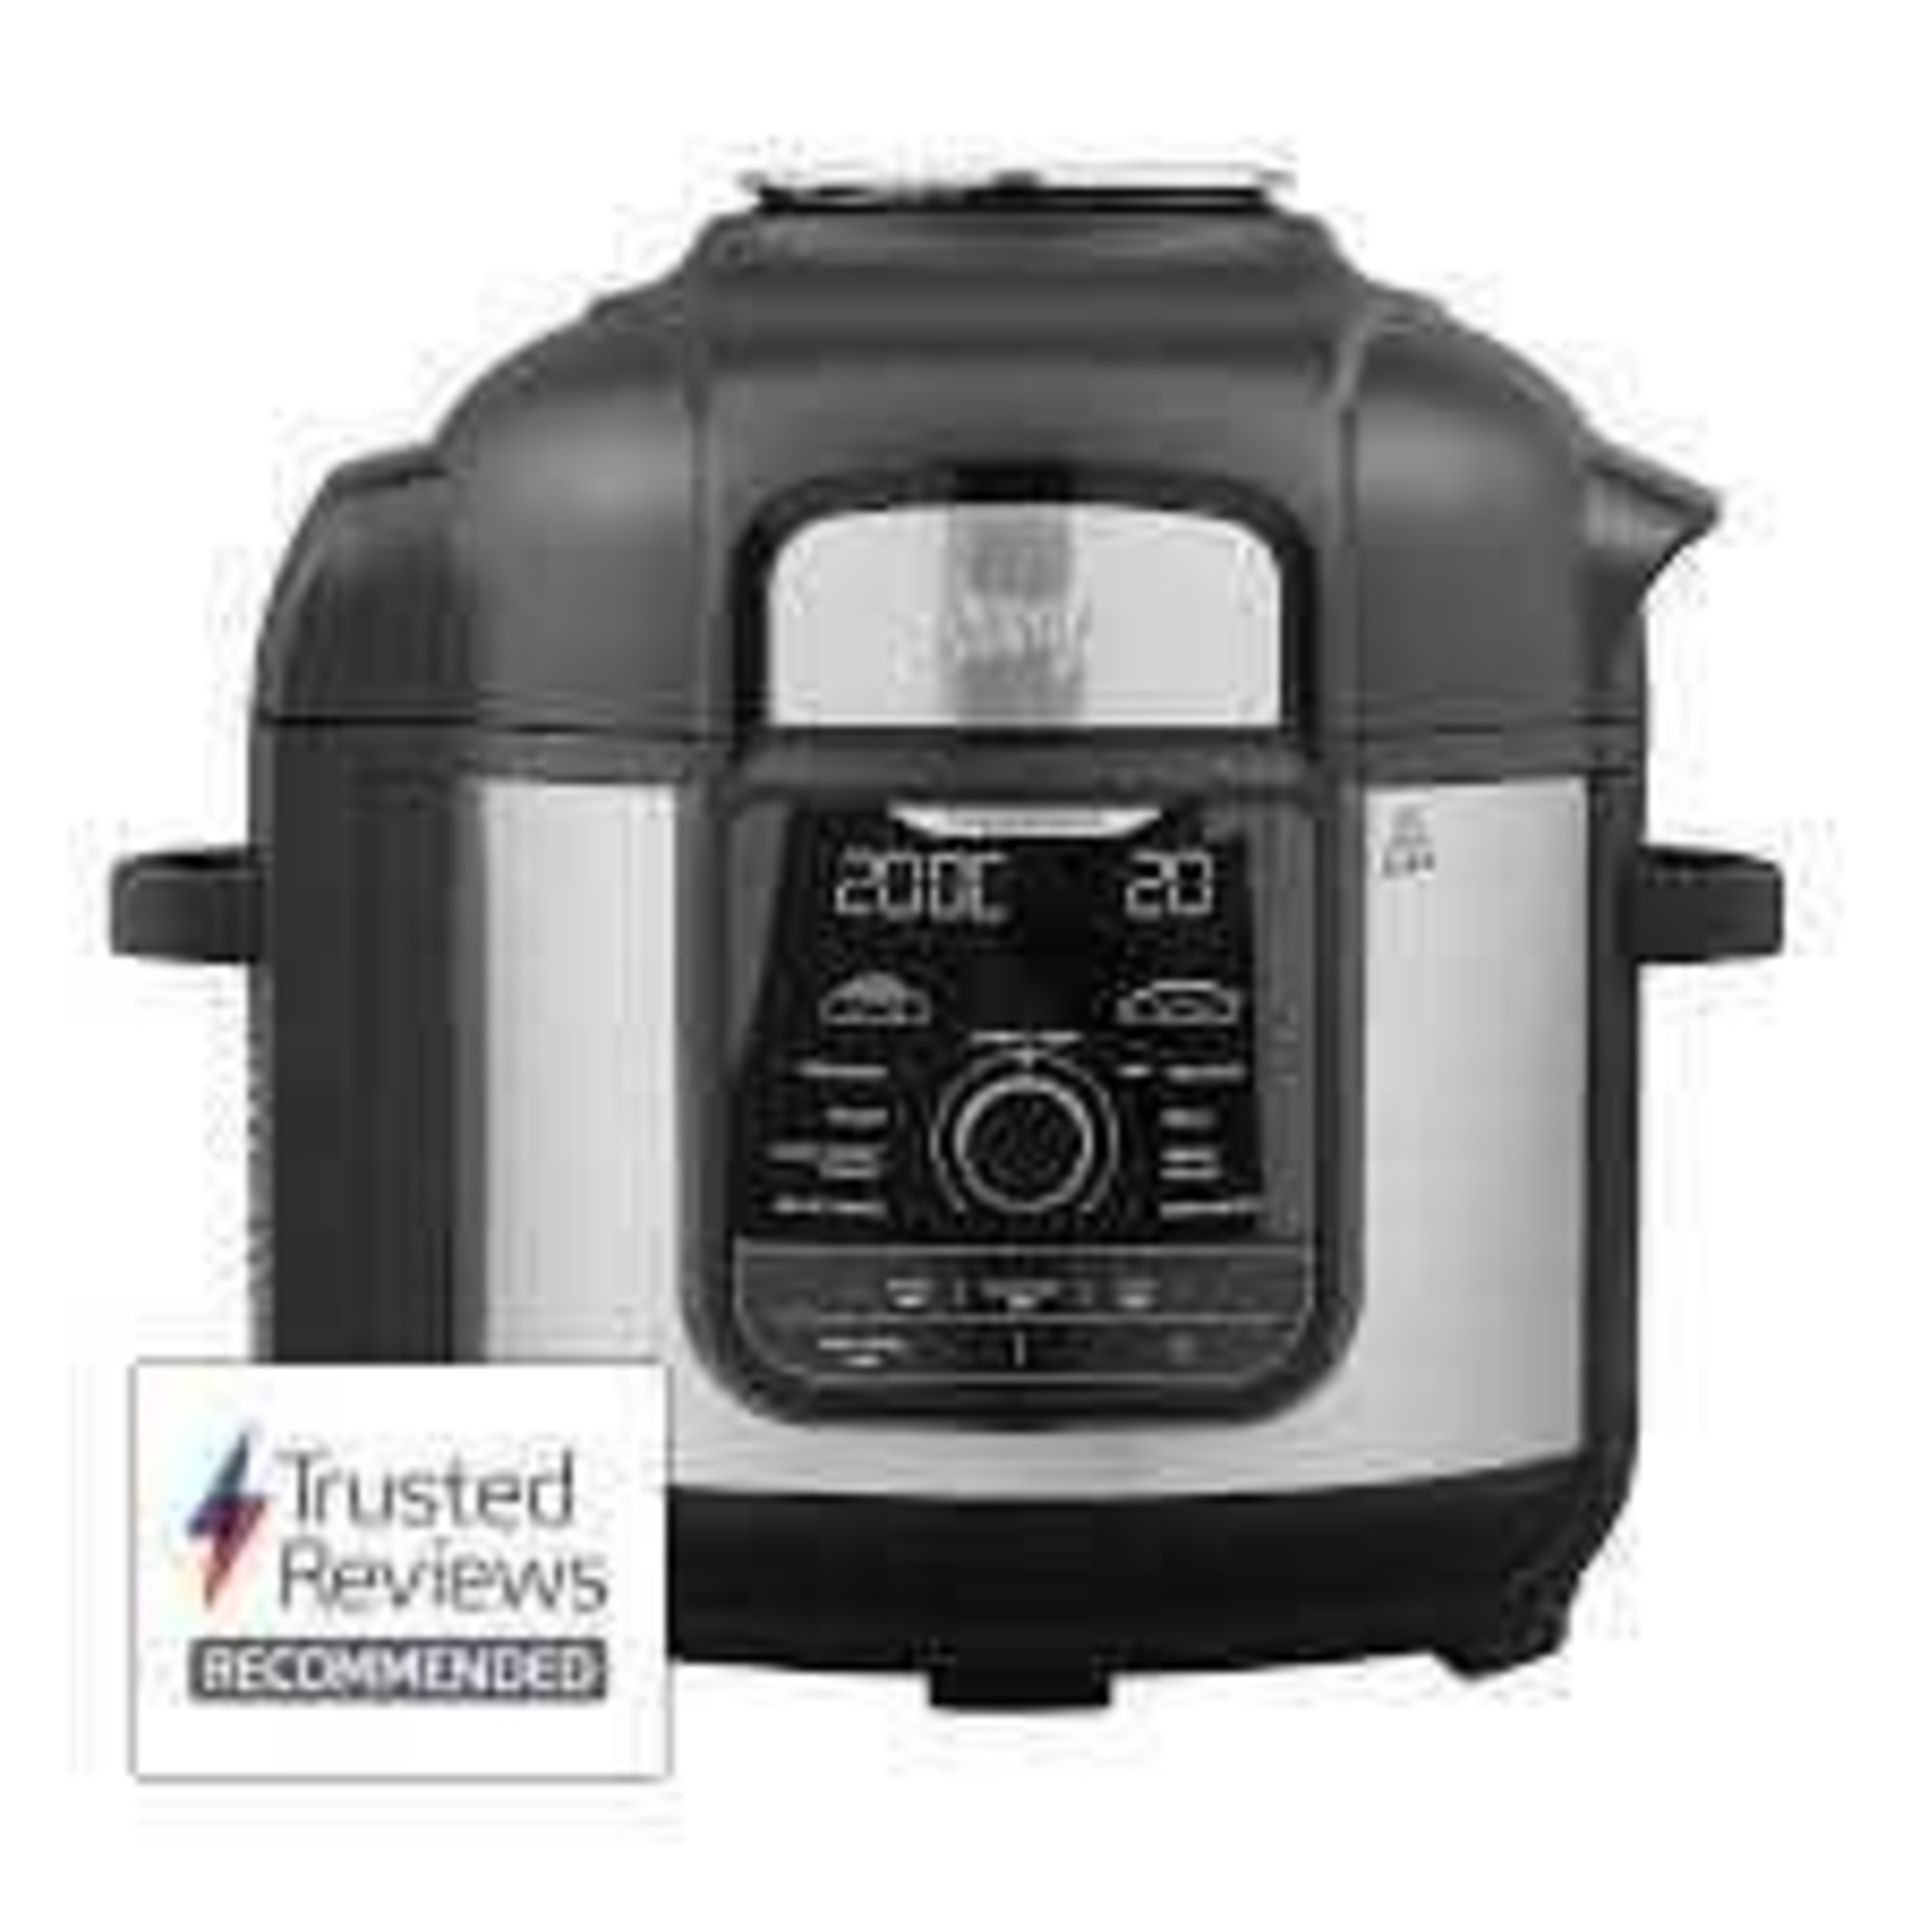 RRP £200 Boxed Ninja Foodi Max 7.5Ltr Multi Cooker (Appraisal Available On Request) (Pictures For